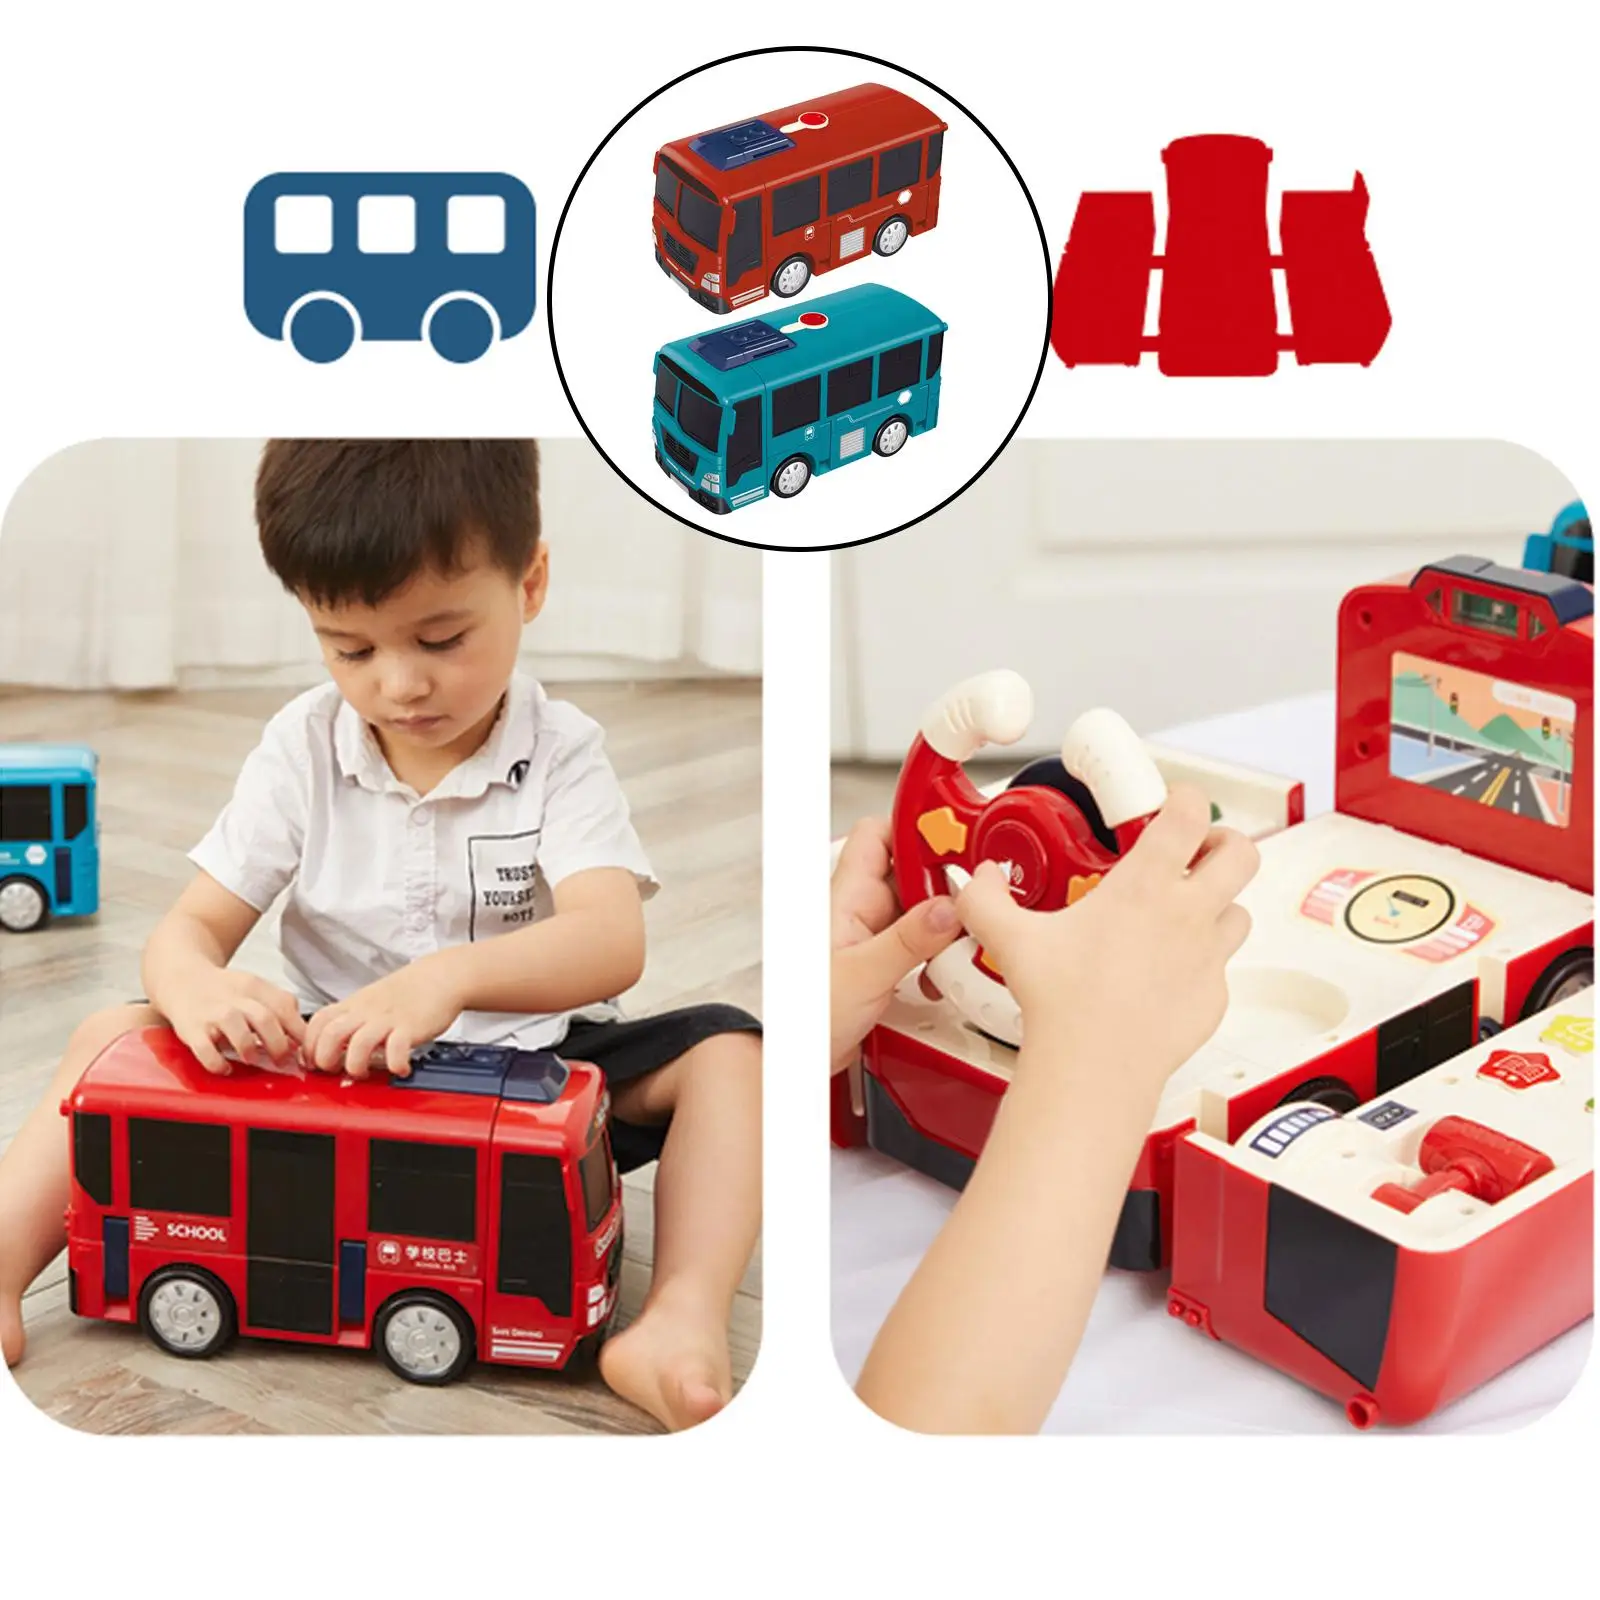 Kids Deformation Bus Car Toy School Bus Toy Bus Driving Toy for Boys & Girls